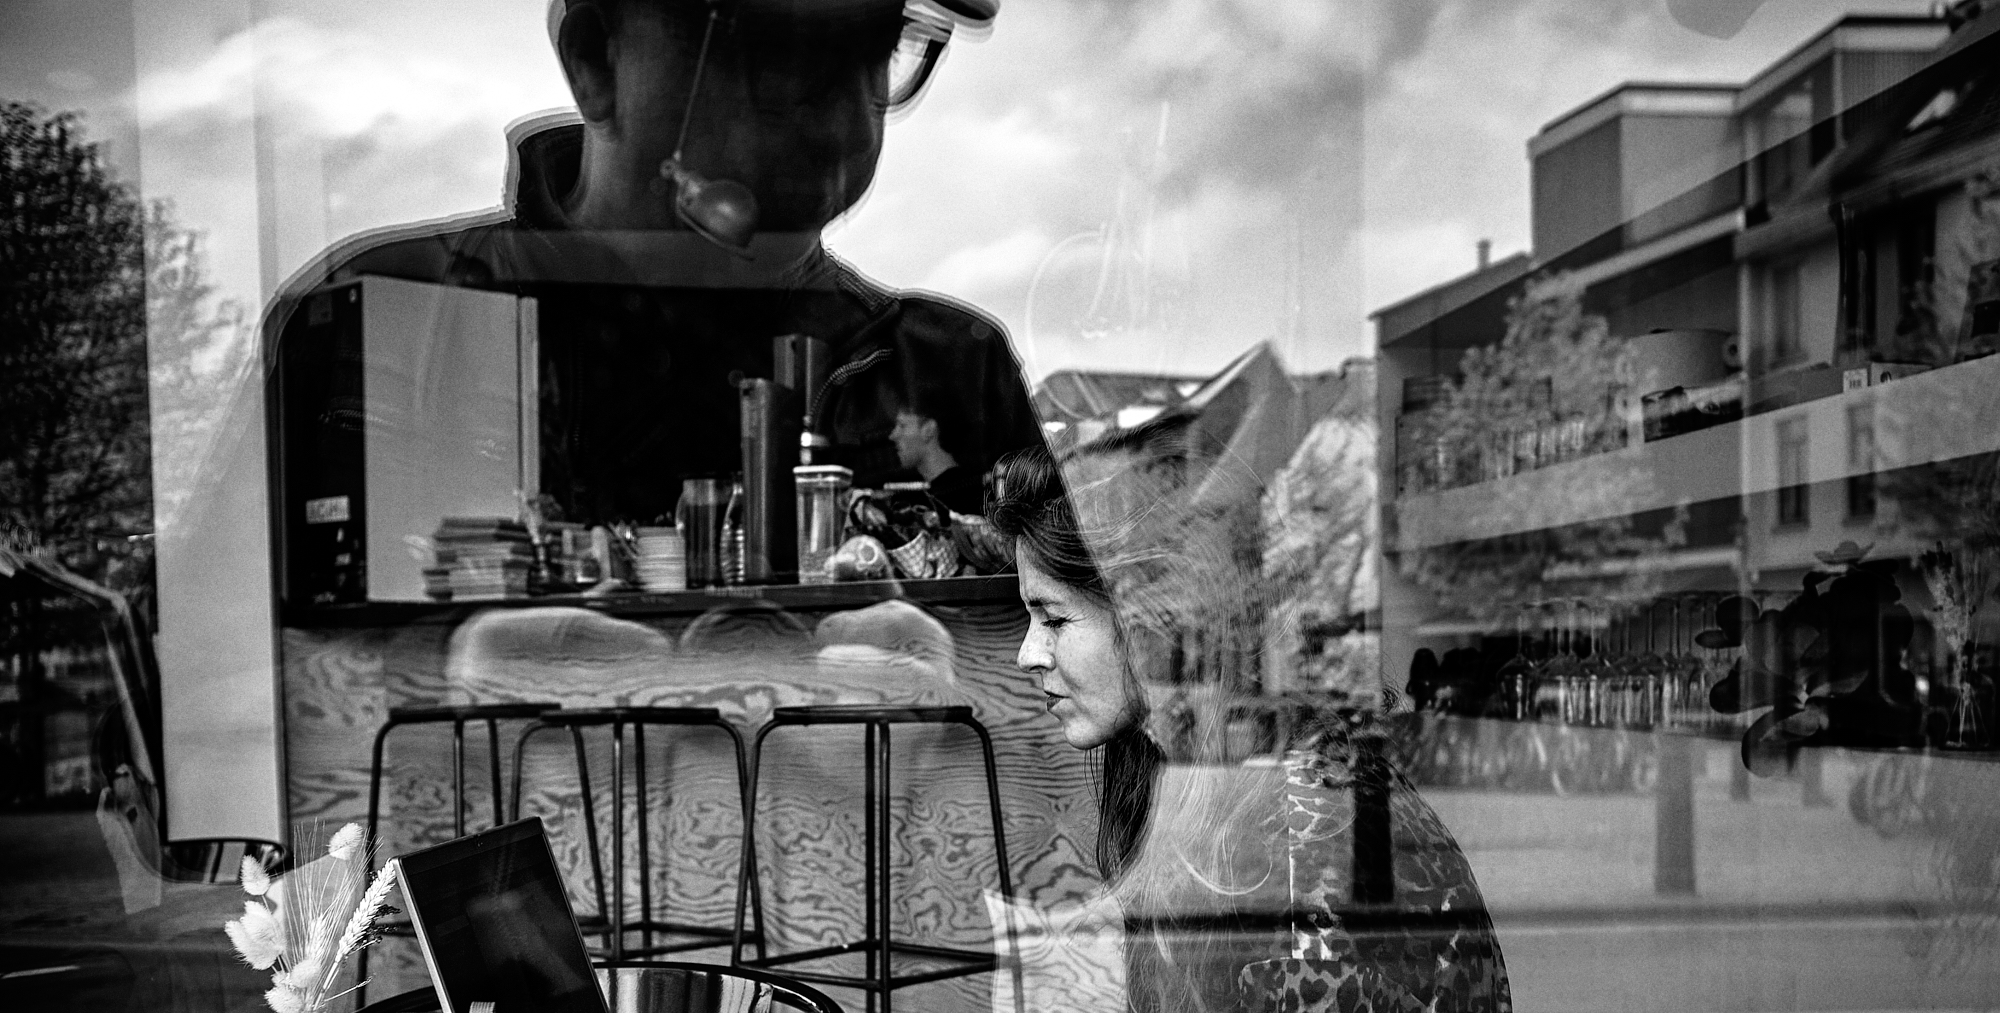 Black & white photograph of a young woman working on her laptop in a coffee shop while the reflection of the photographer is looming over her